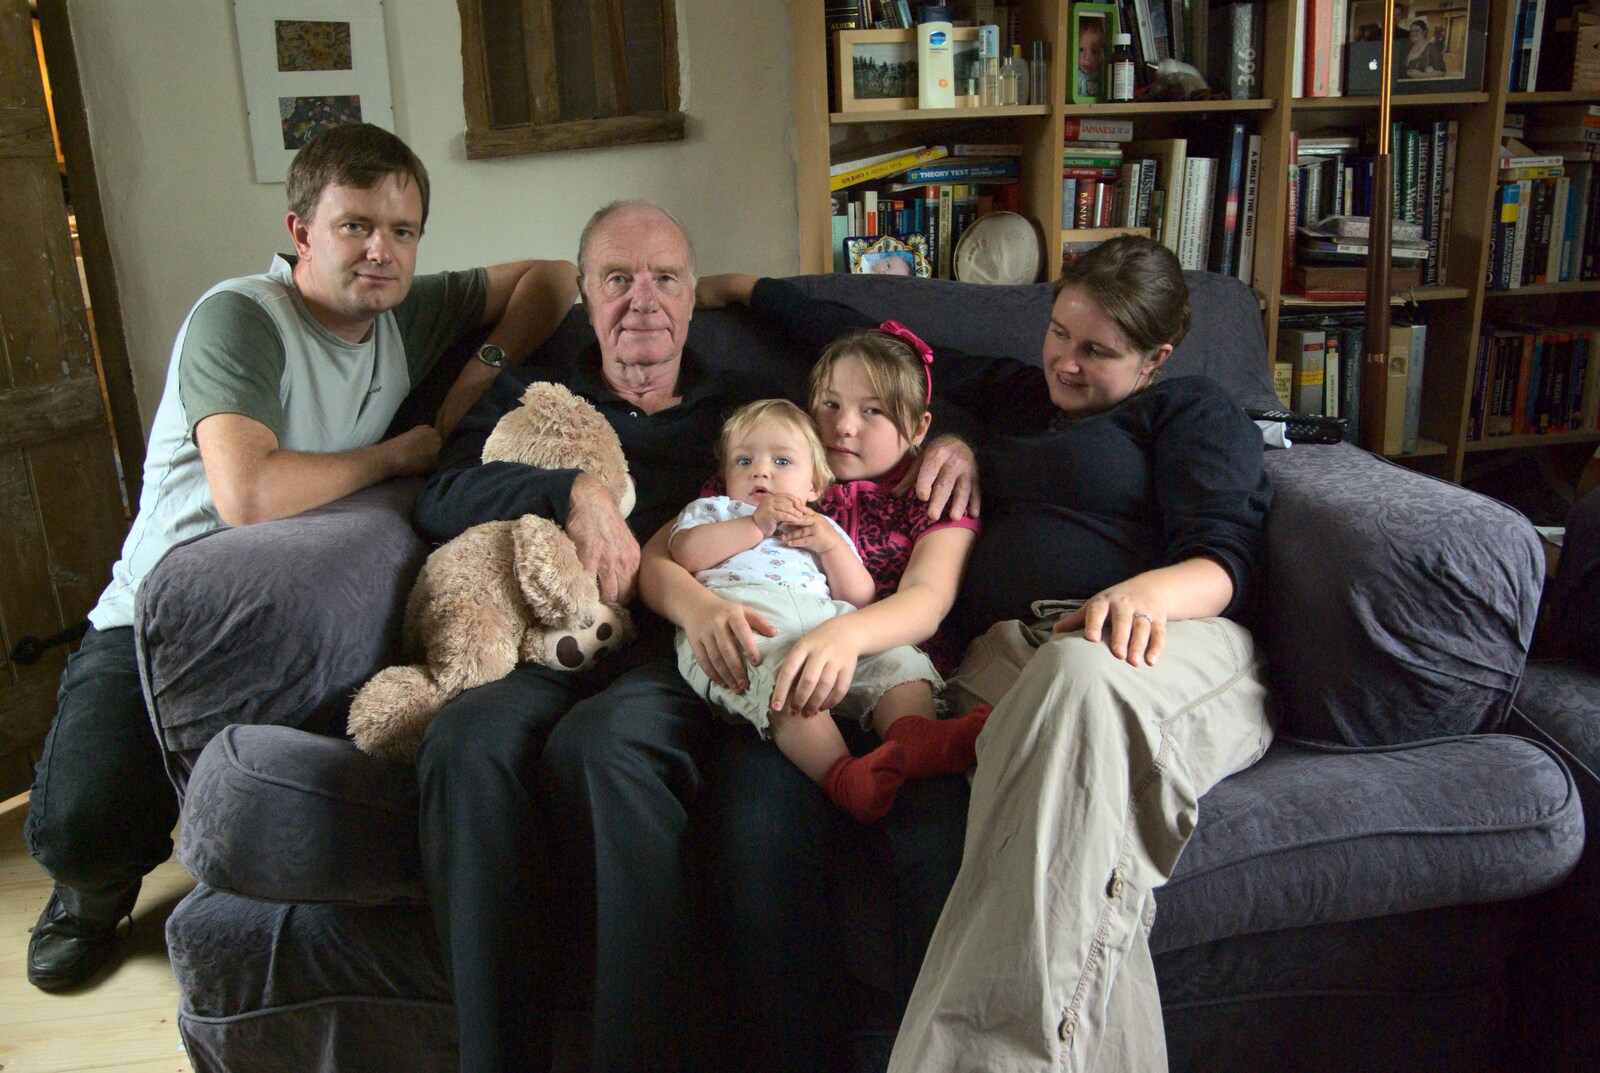 A self-timer family photo from Emily and The Old Chap Visit, Brome, Suffolk - 29th August 2009